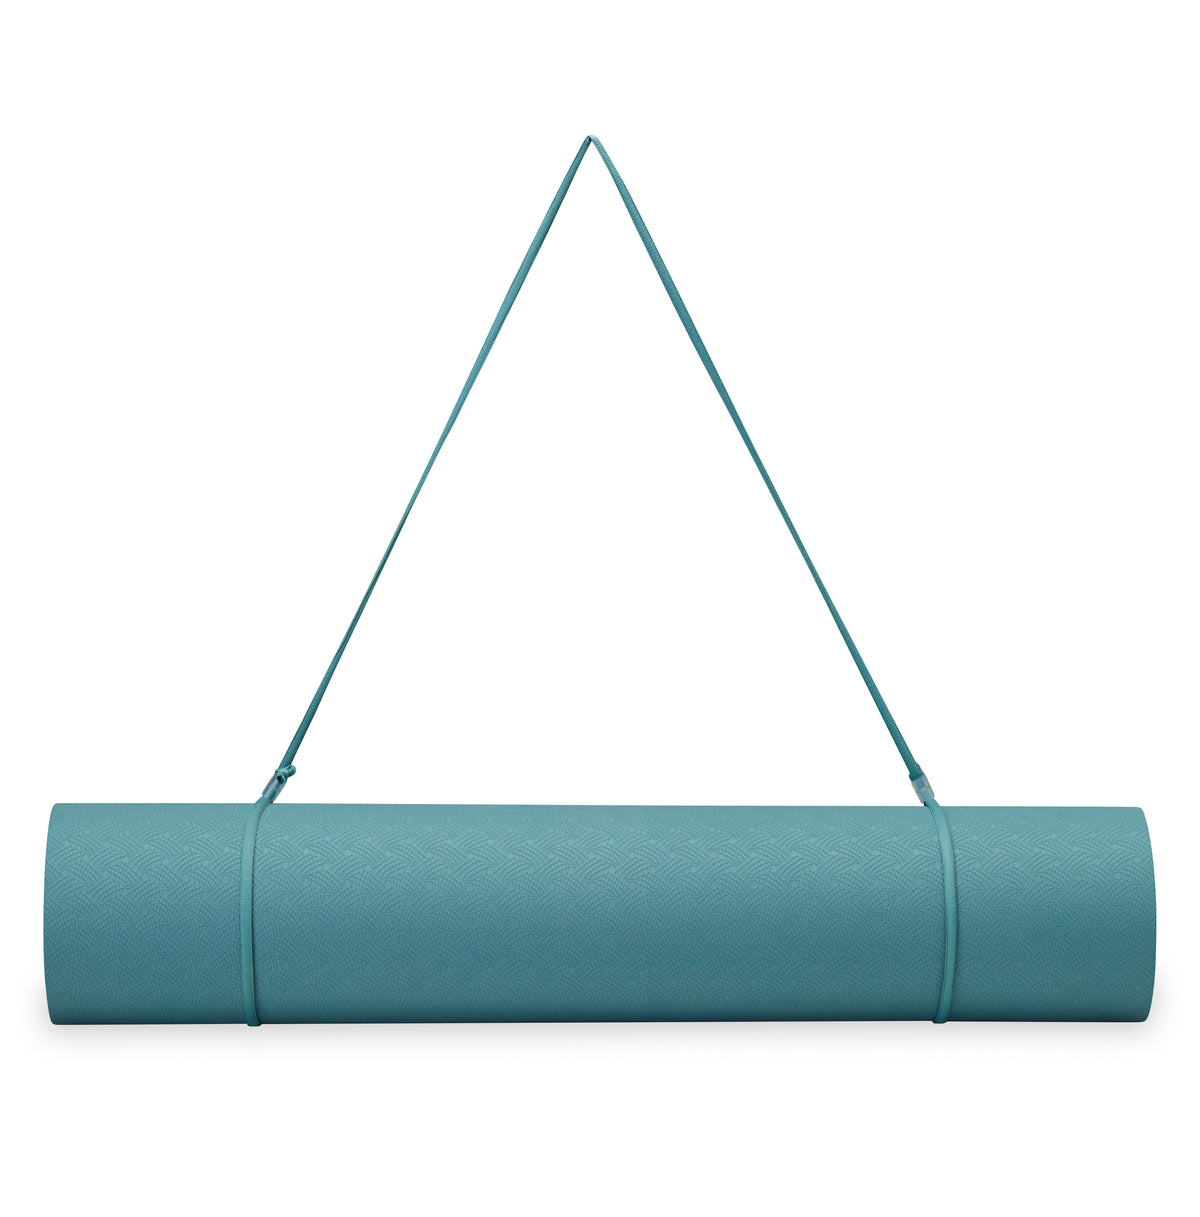 Gaiam Performance Yoga Mat (6mm) Seafoam/Dusty Pink rolled up with sling